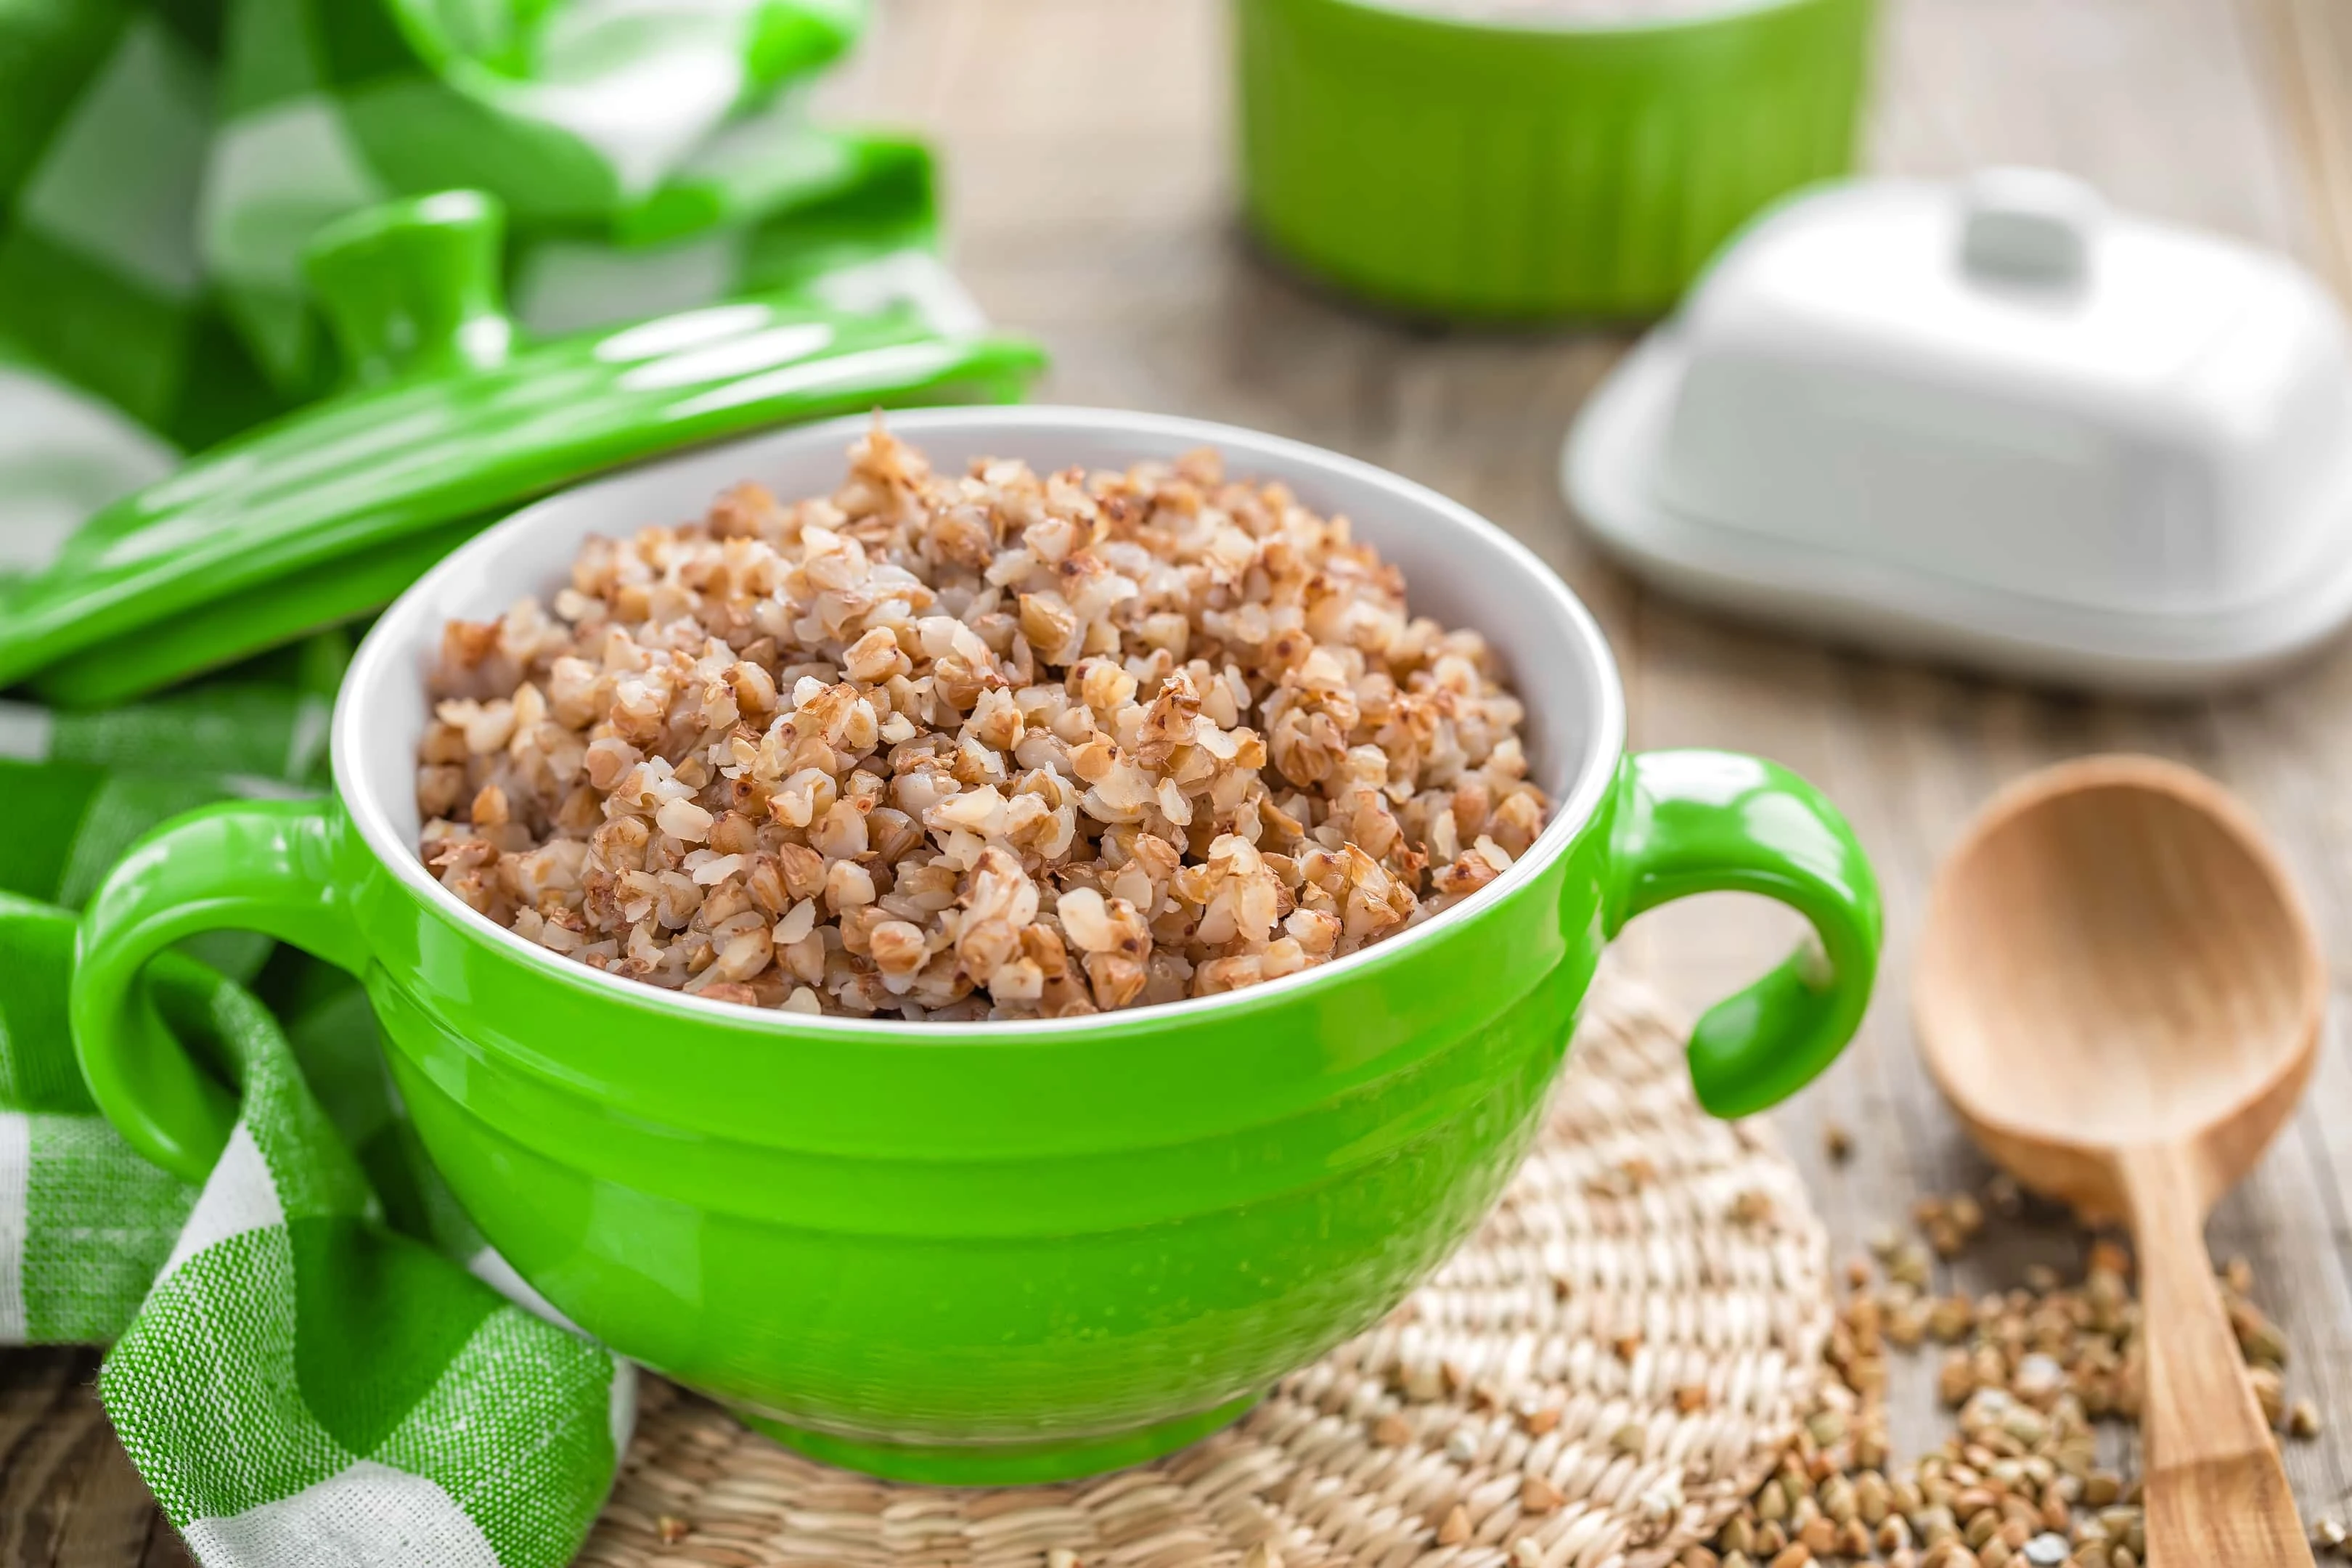 Buckwheat is one of the low glycemic gluten free foods